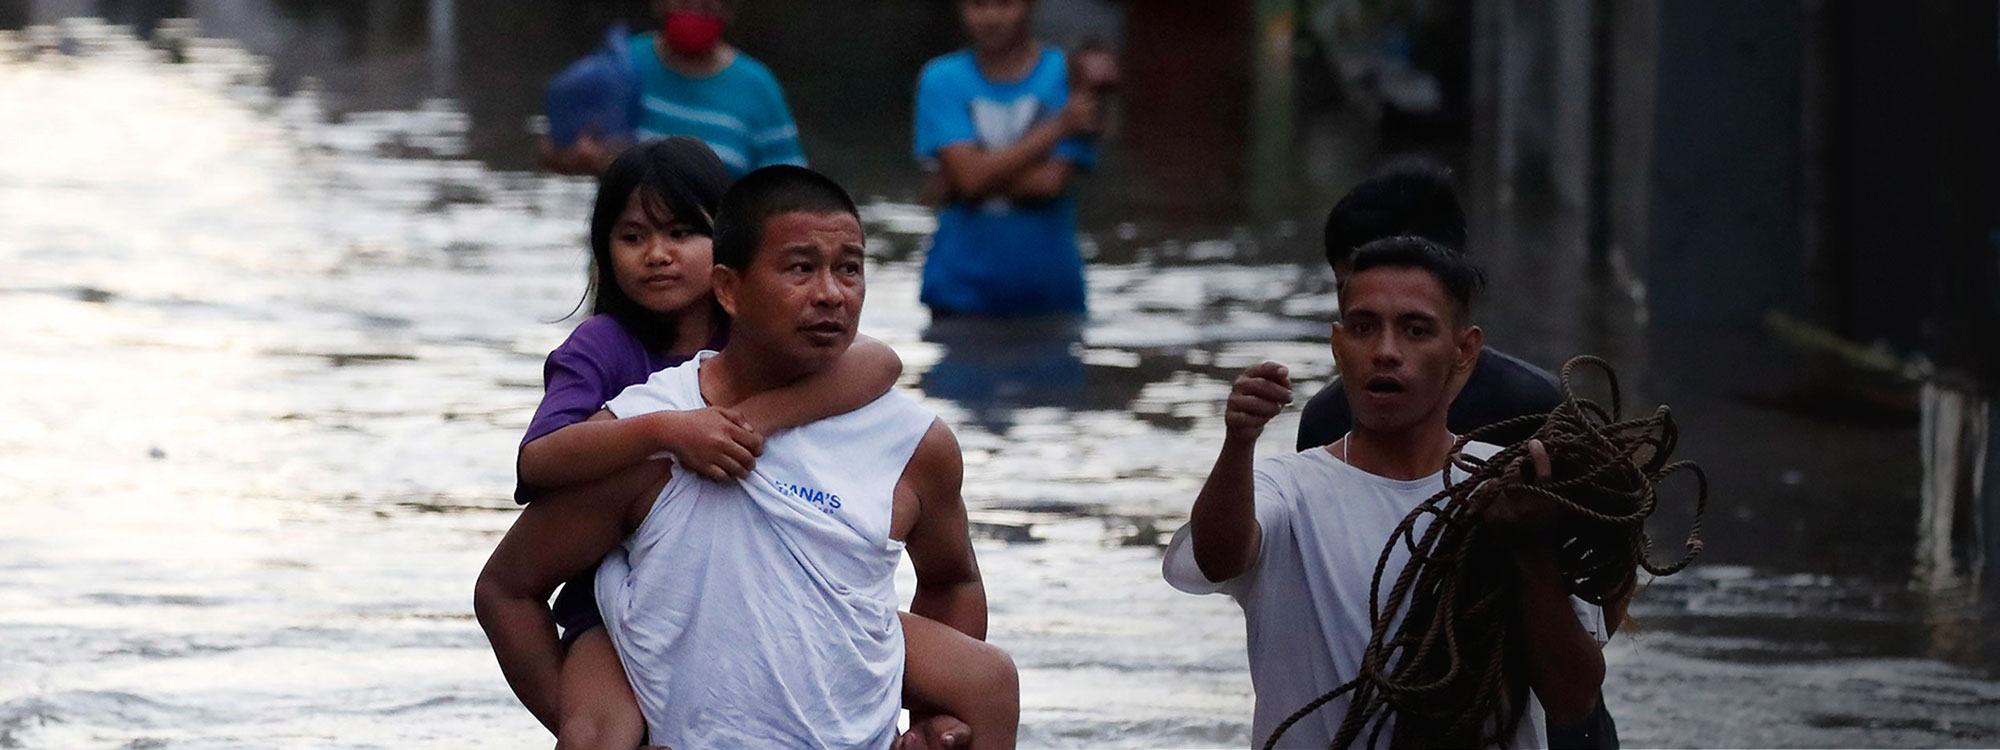 A man carries his daughter as he and others wade through waist deep water